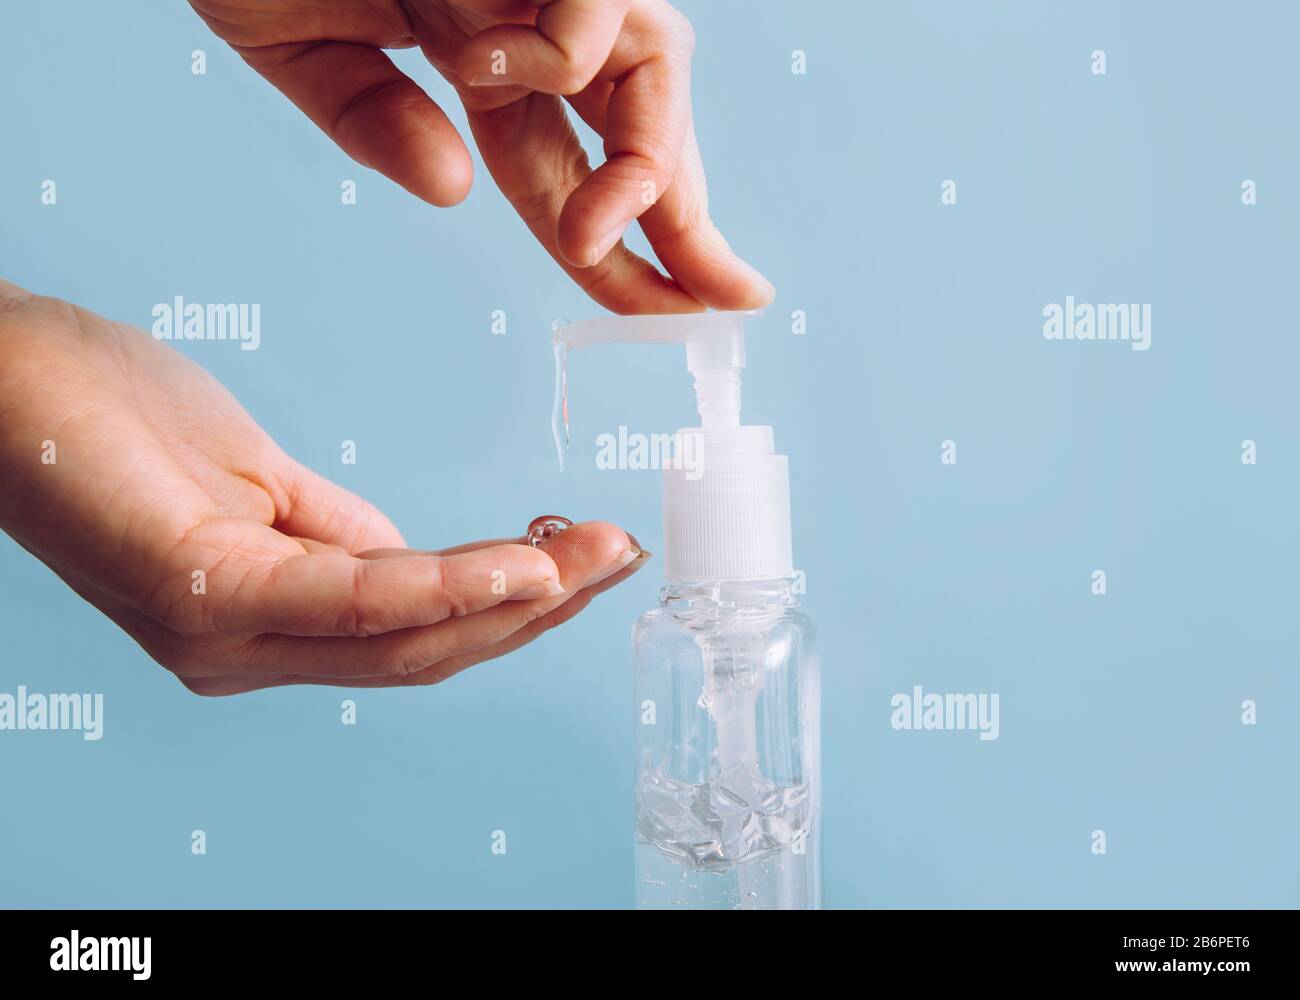 Close up view of woman using hand sanitizer dispenser, blue clean minimalist background. Health concerns concept. Stock Photo